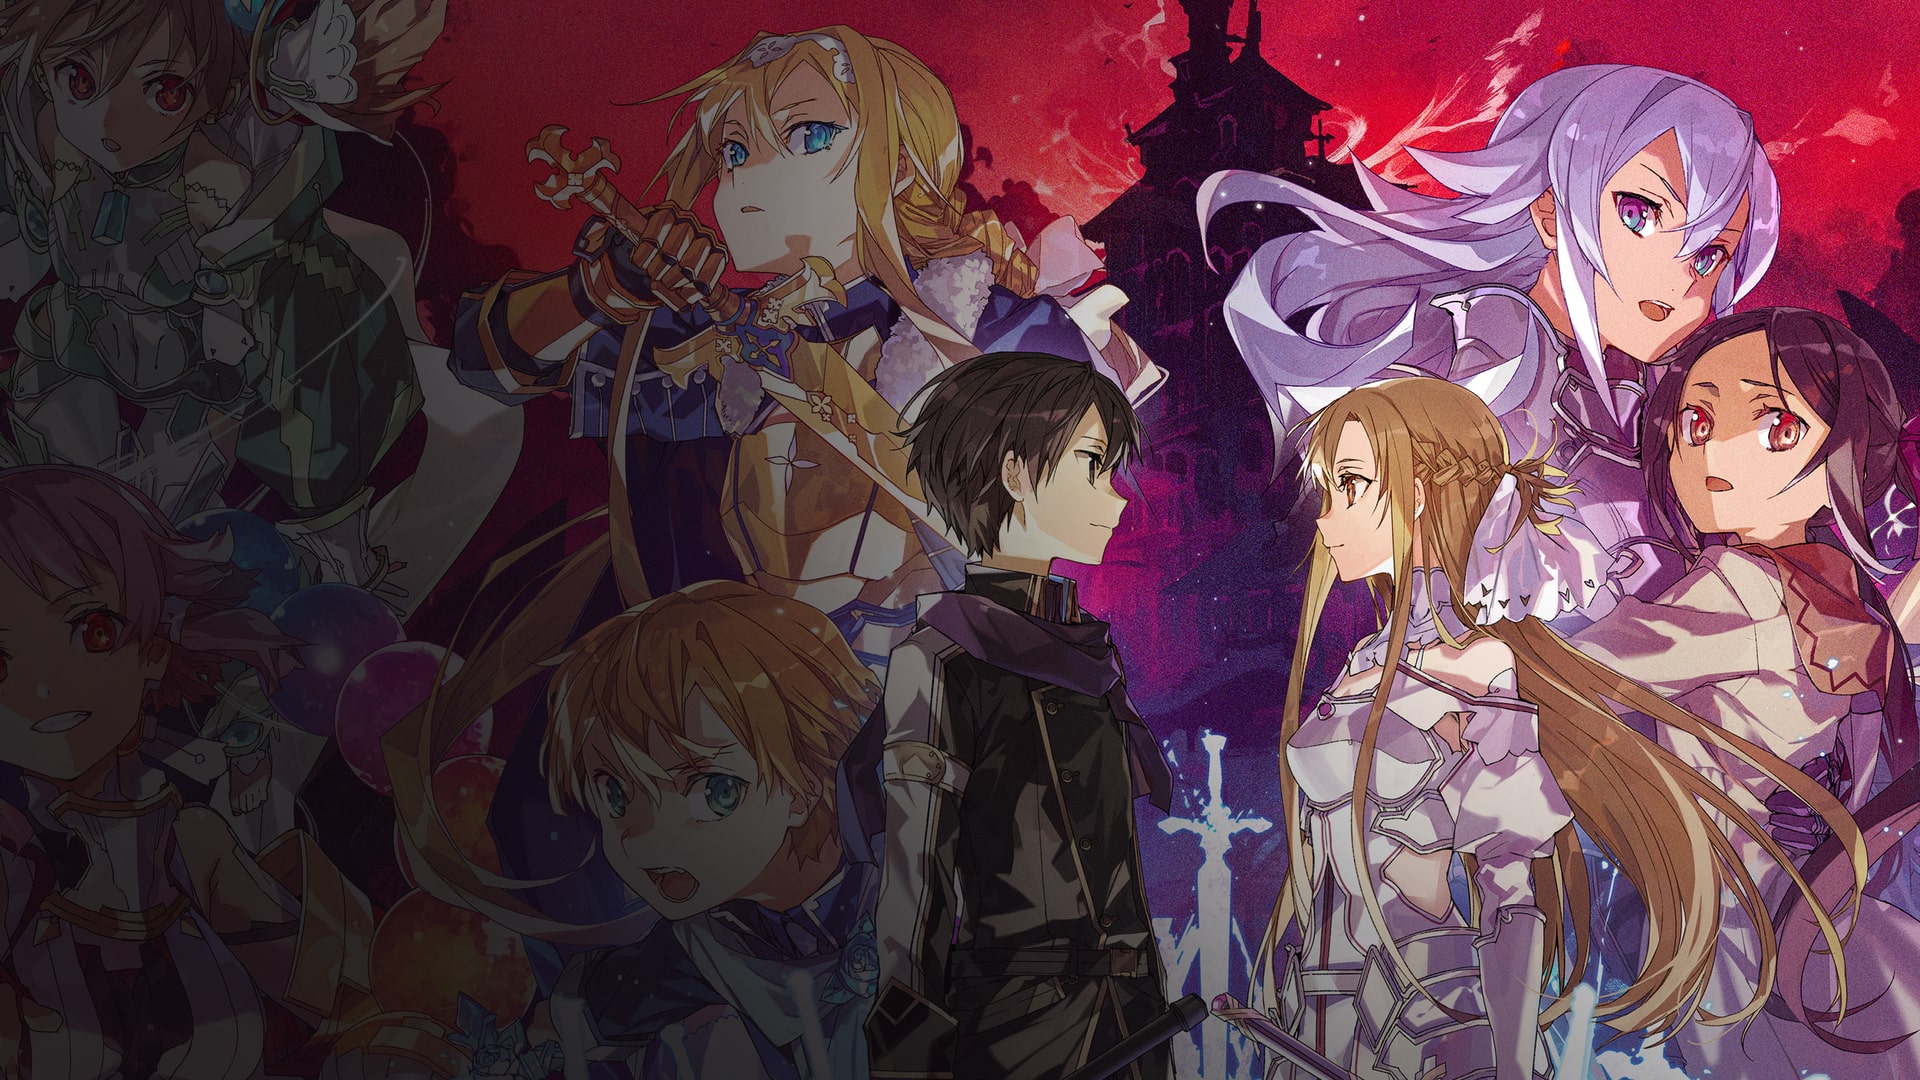 Sword Art Online: Last Recollection Demo Now Available - Fextralife